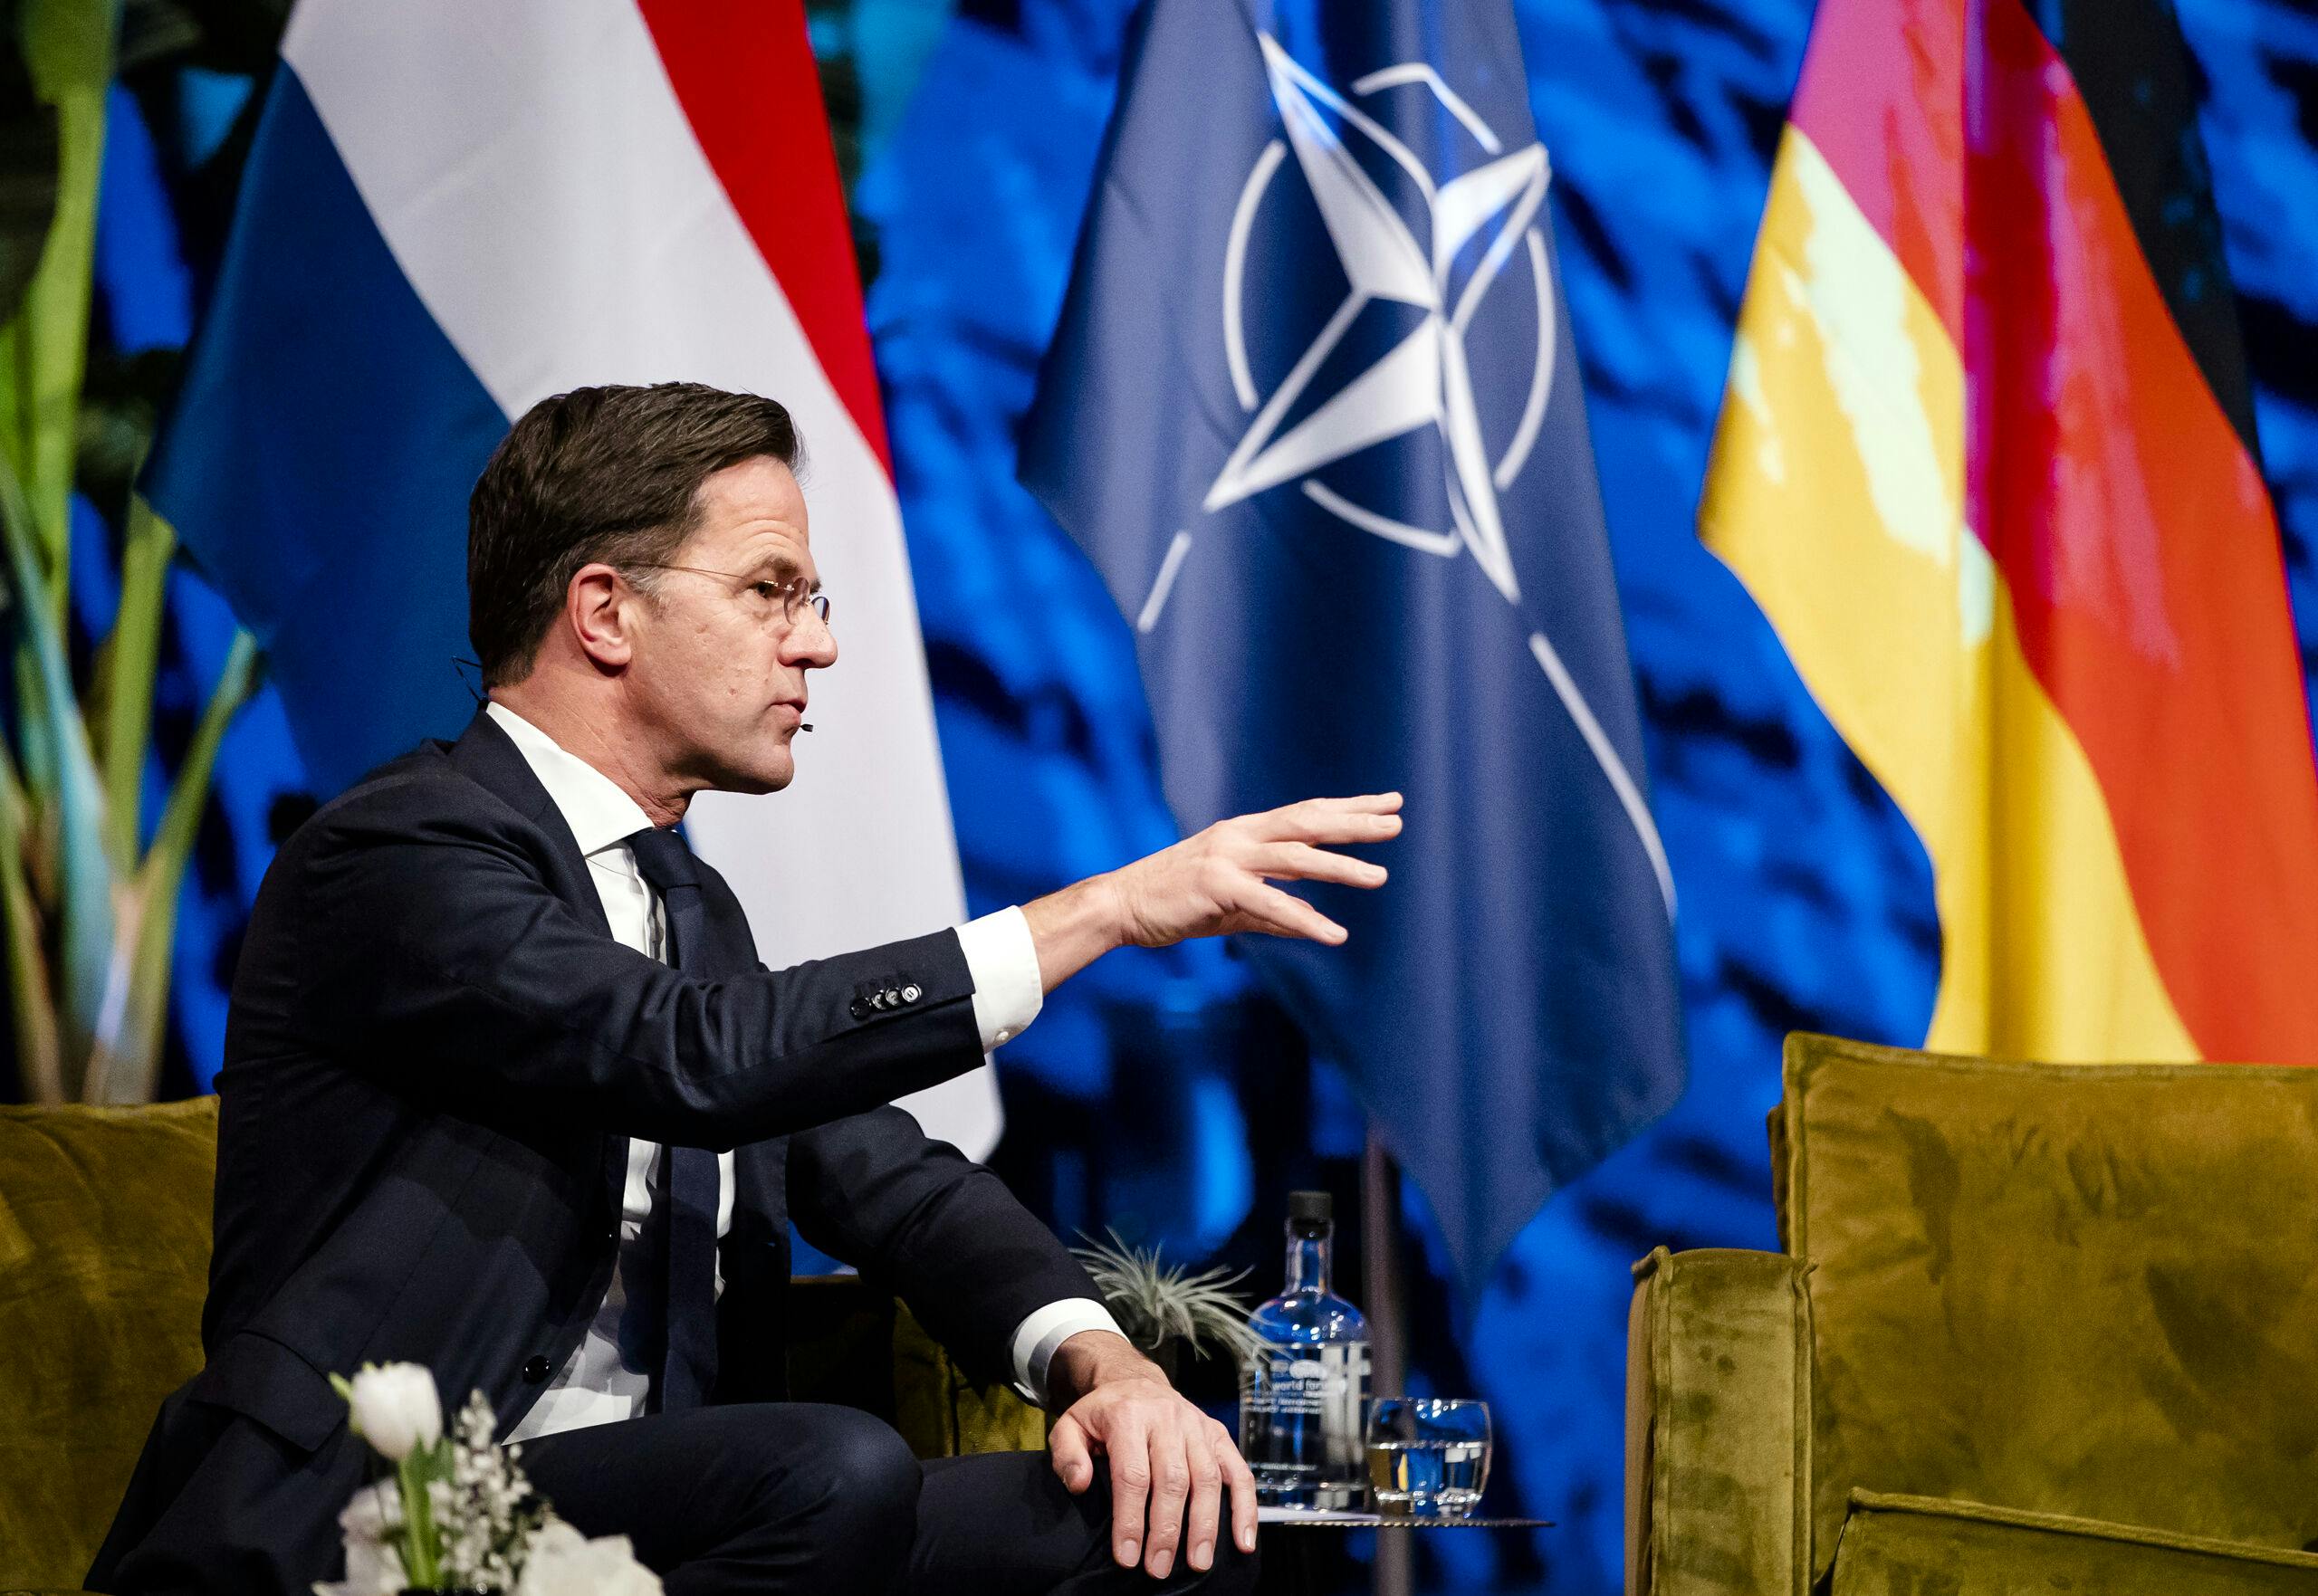 Rutte dinner with top NATO executives and world leaders